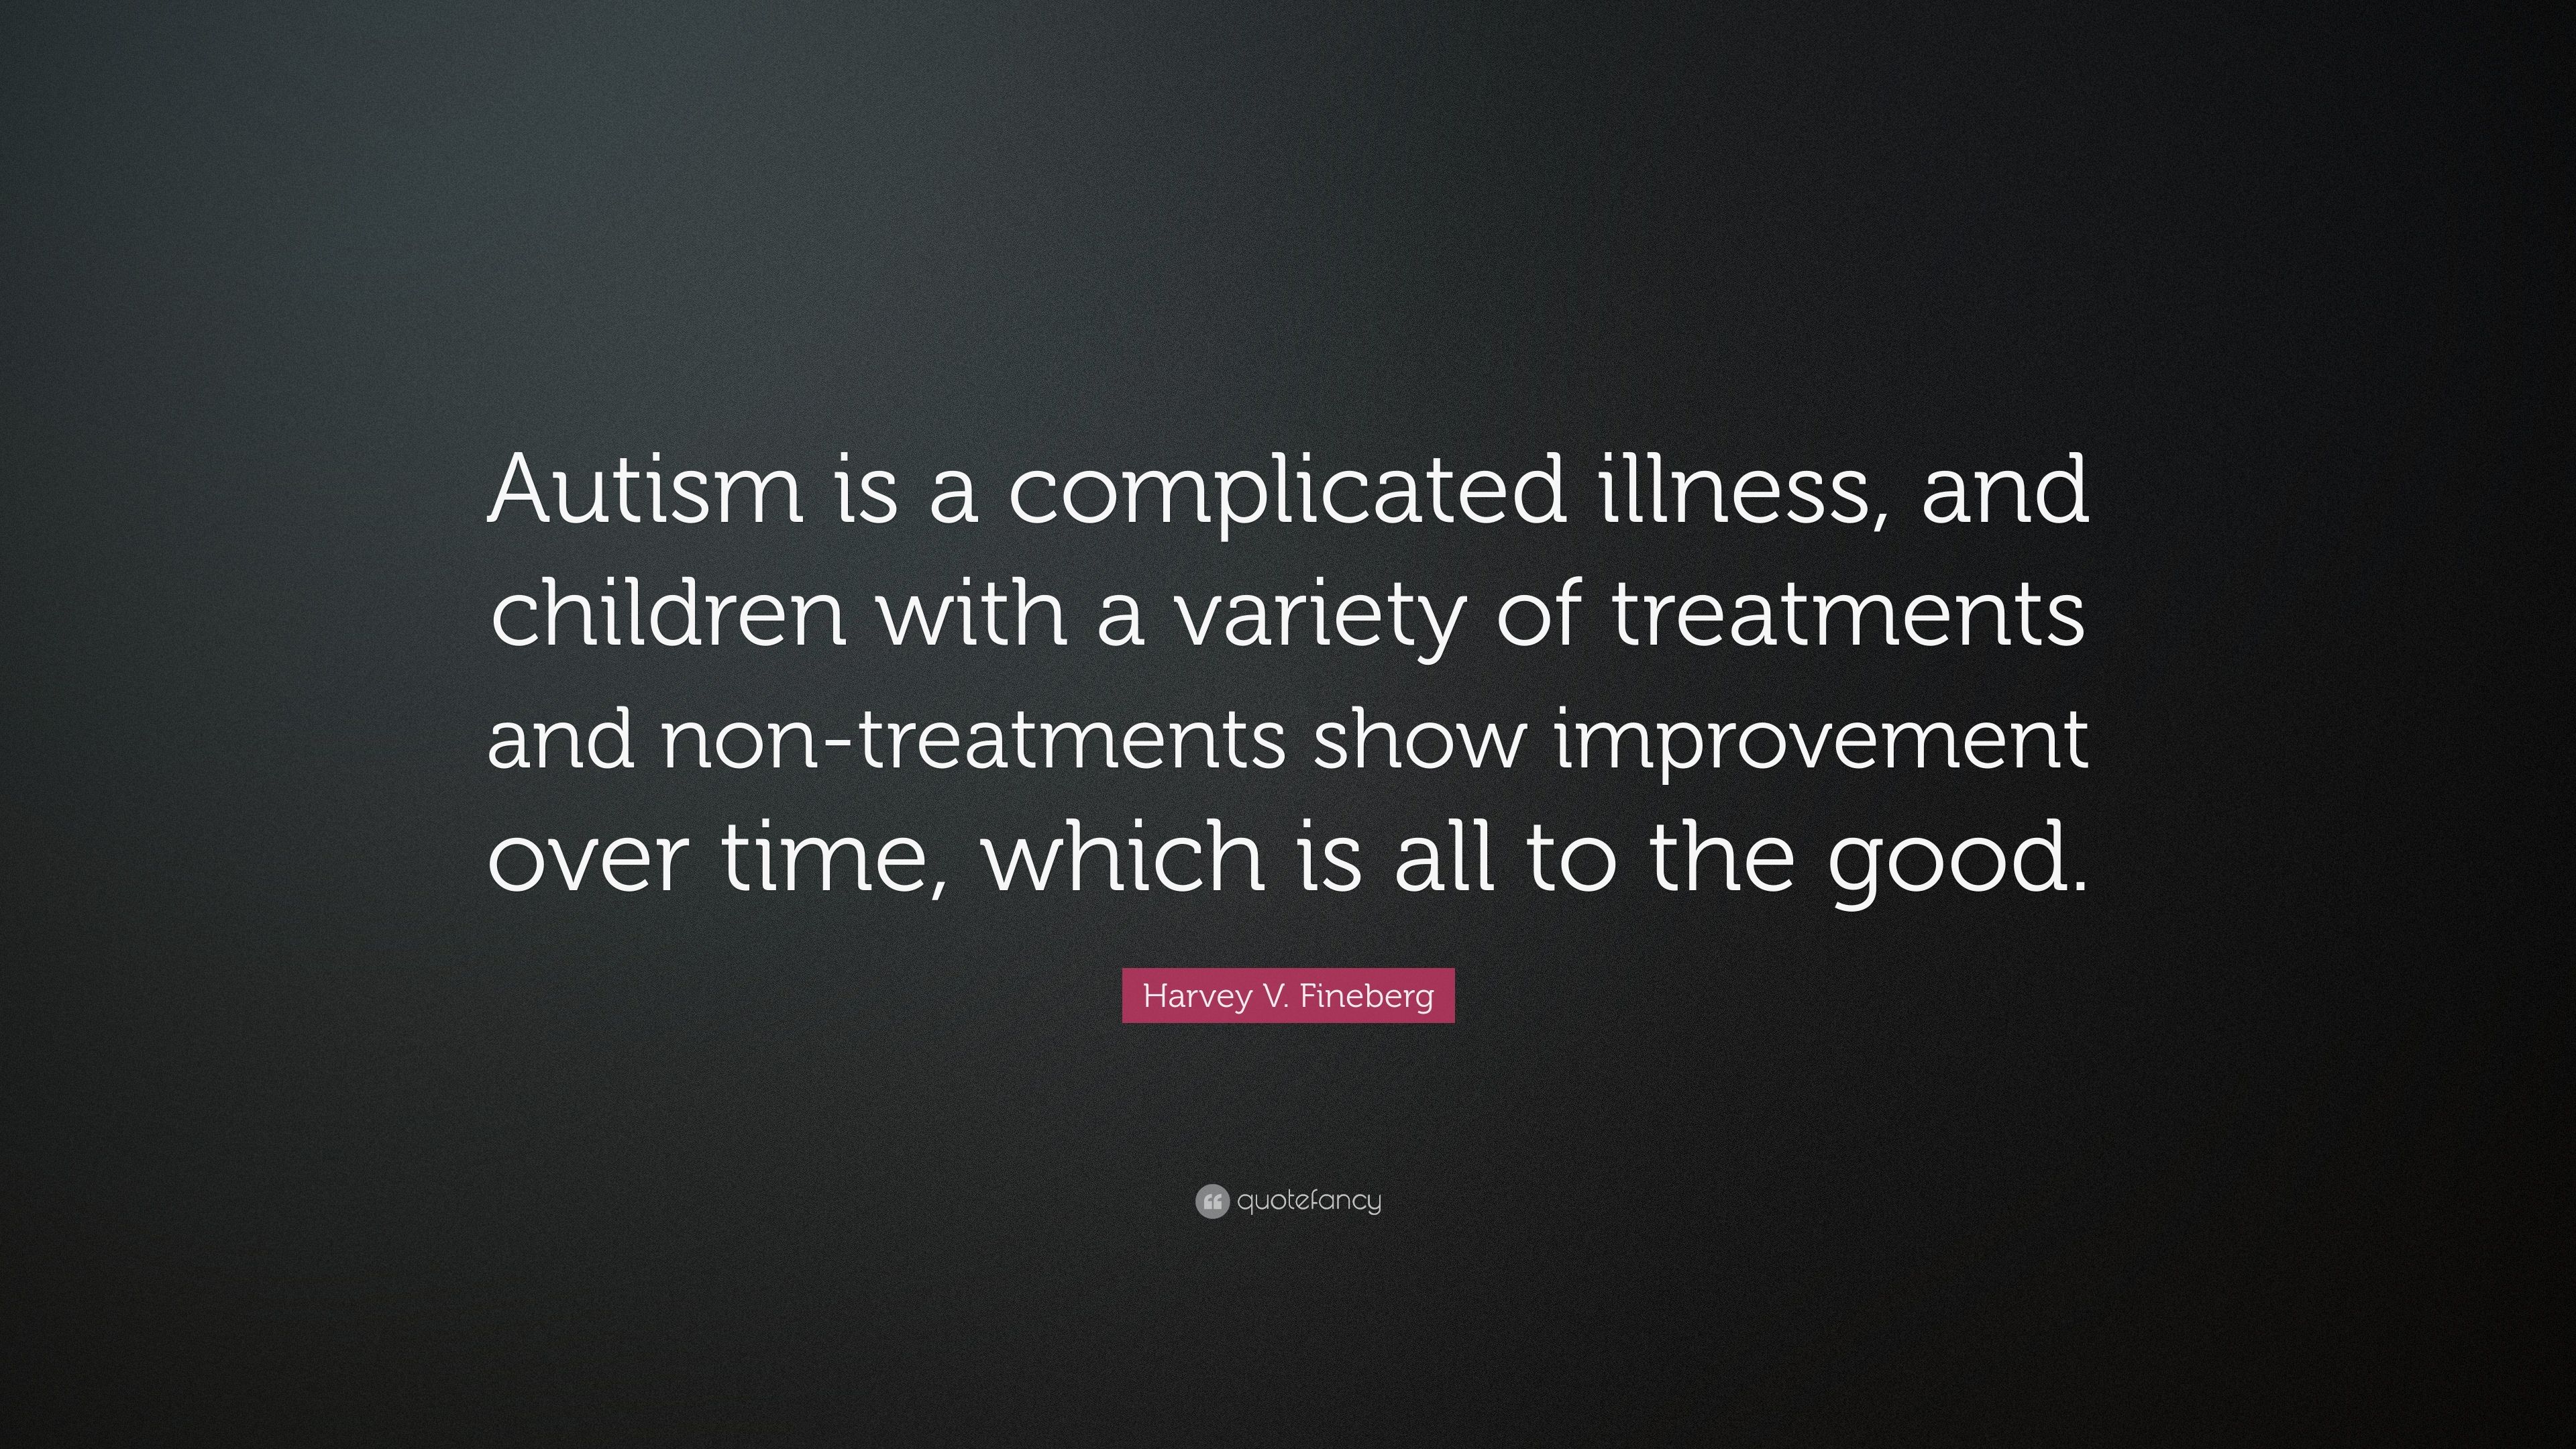 Harvey V. Fineberg Quote: “Autism is a complicated illness